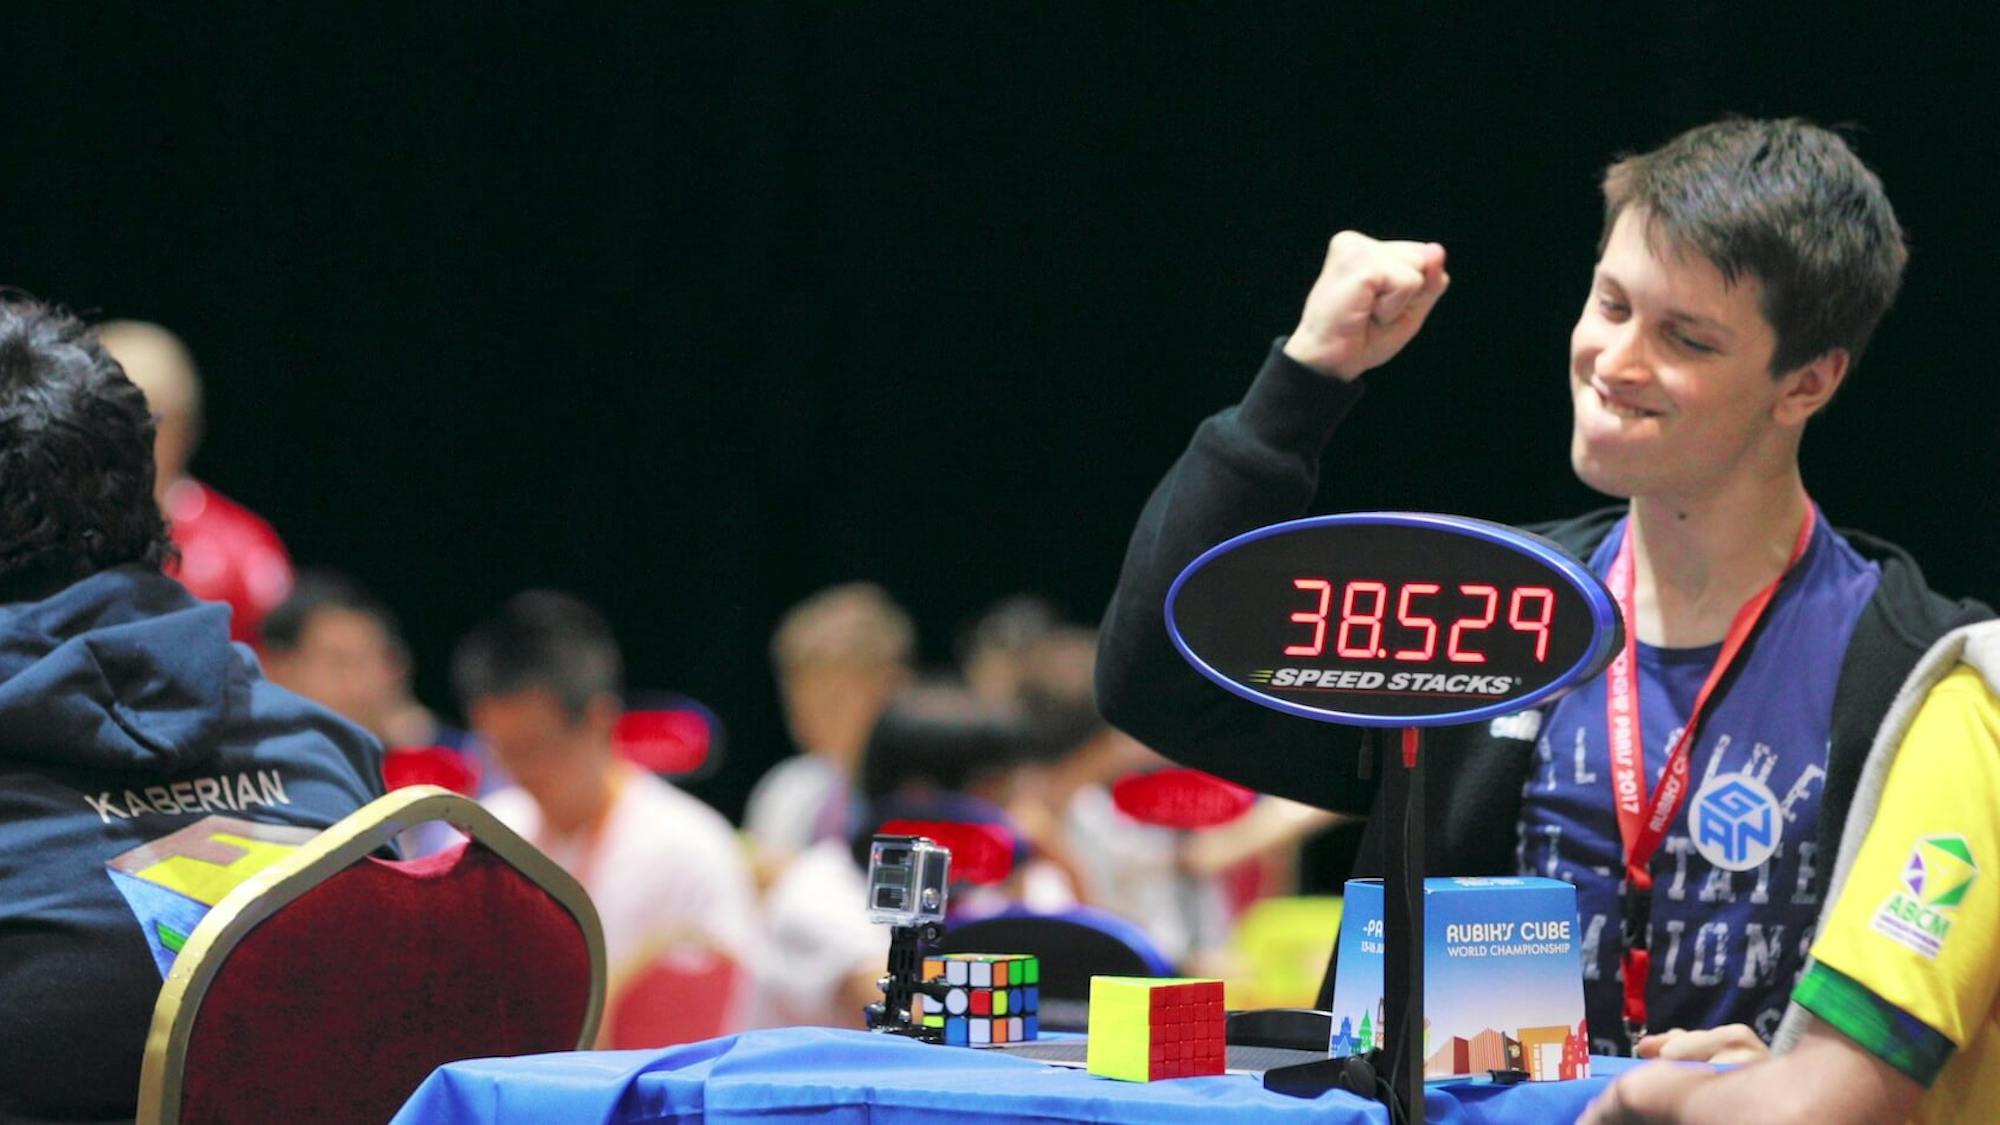 Feliks Zemdegs raises his fist after completing a difficult Rubik’s cube solve. The timer reads: 38.529.